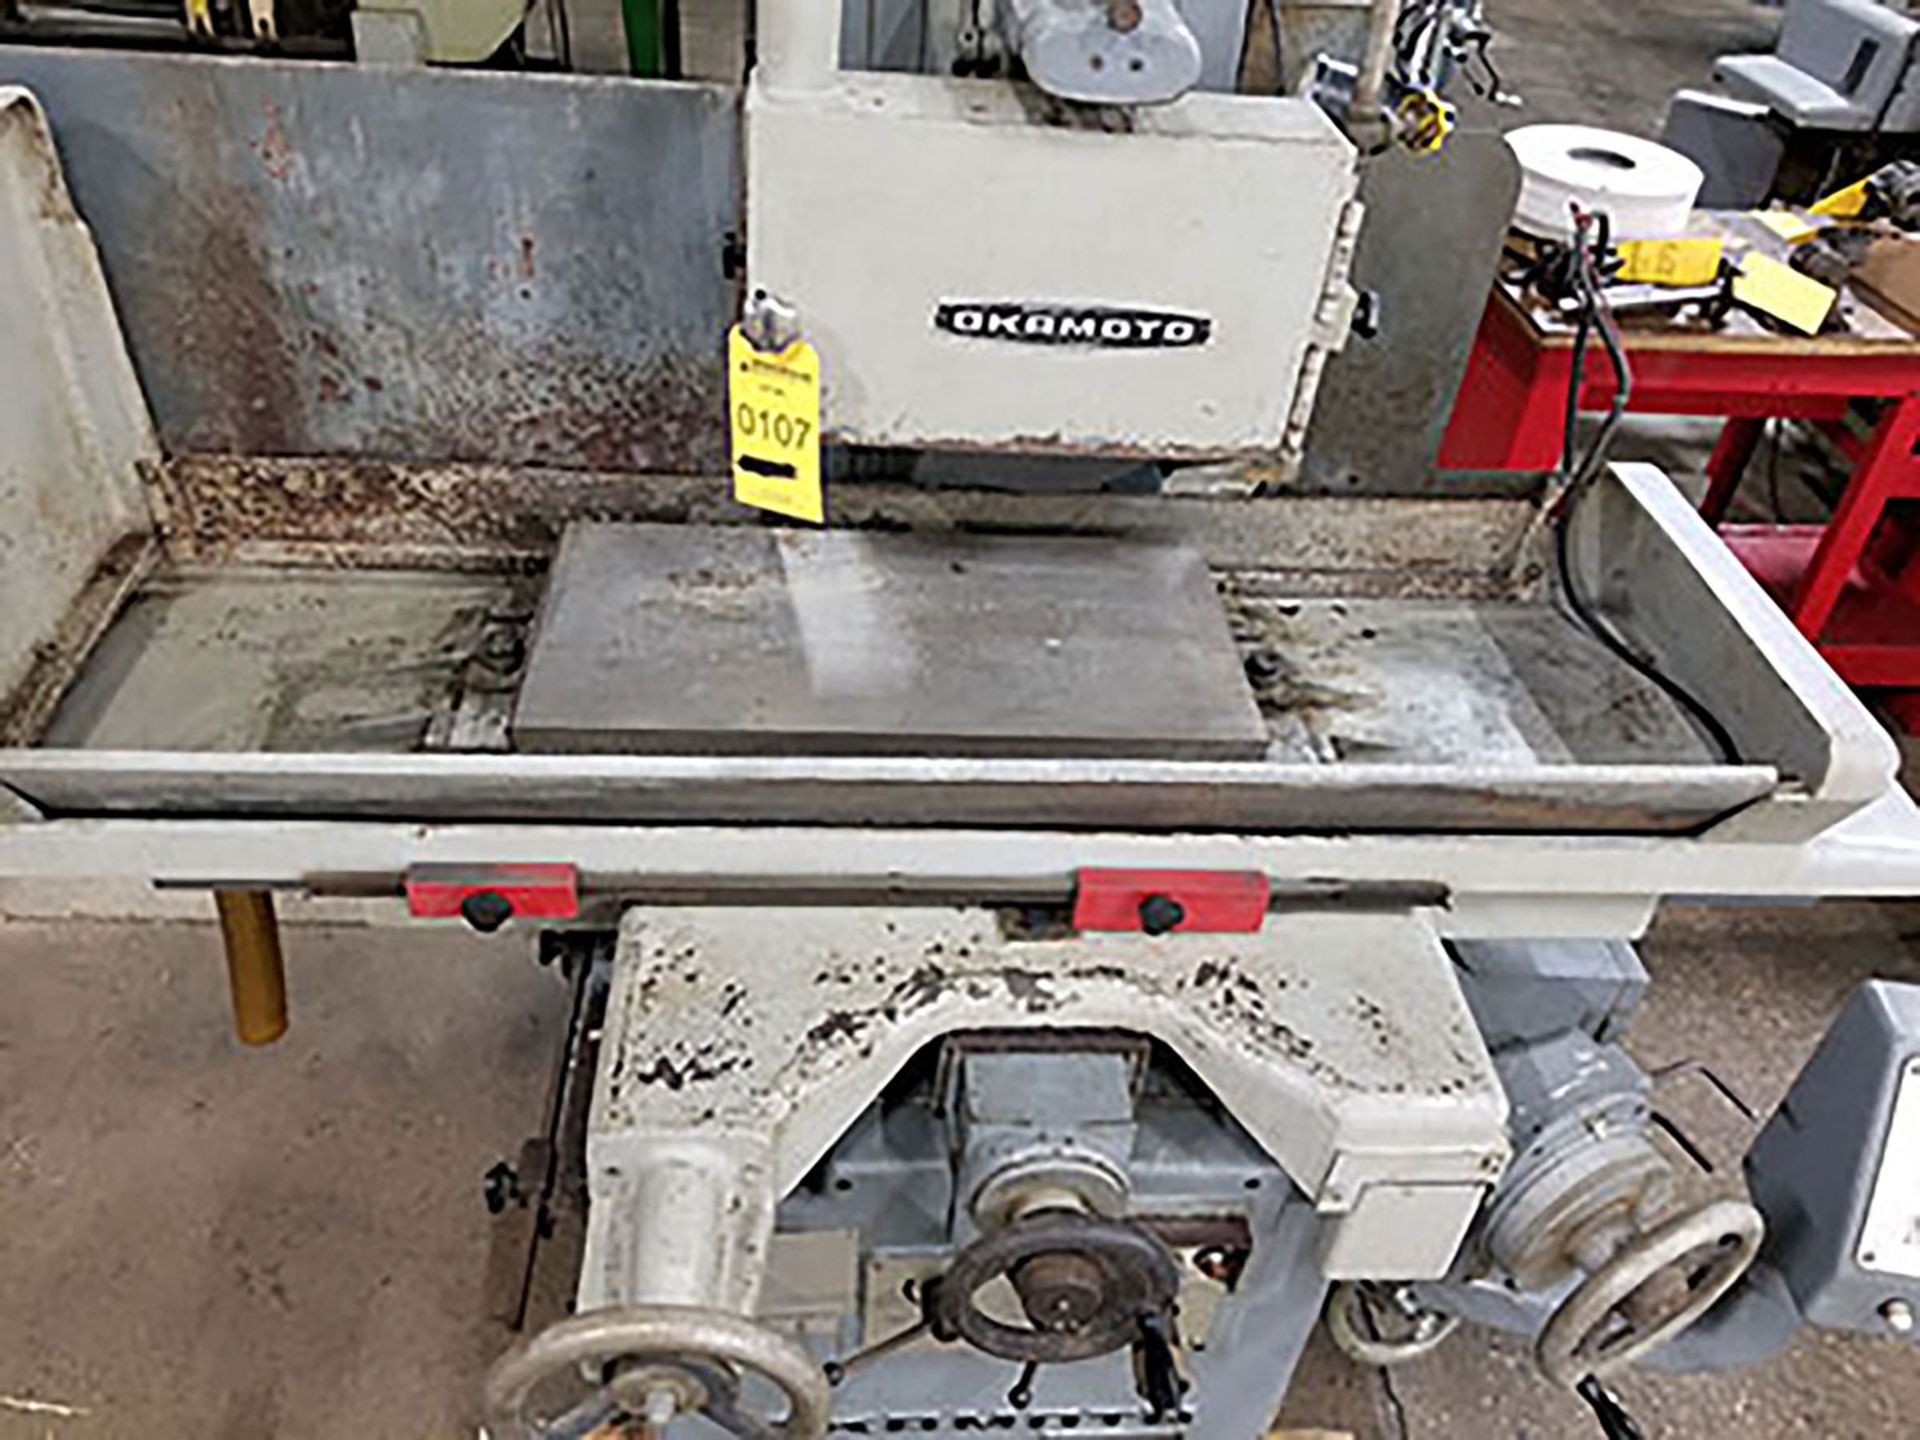 OKAMOTO ACCUGAR 124 SURFACE GRINDER; MAGNETIC CHUCK, S/N 2118 - Image 4 of 5